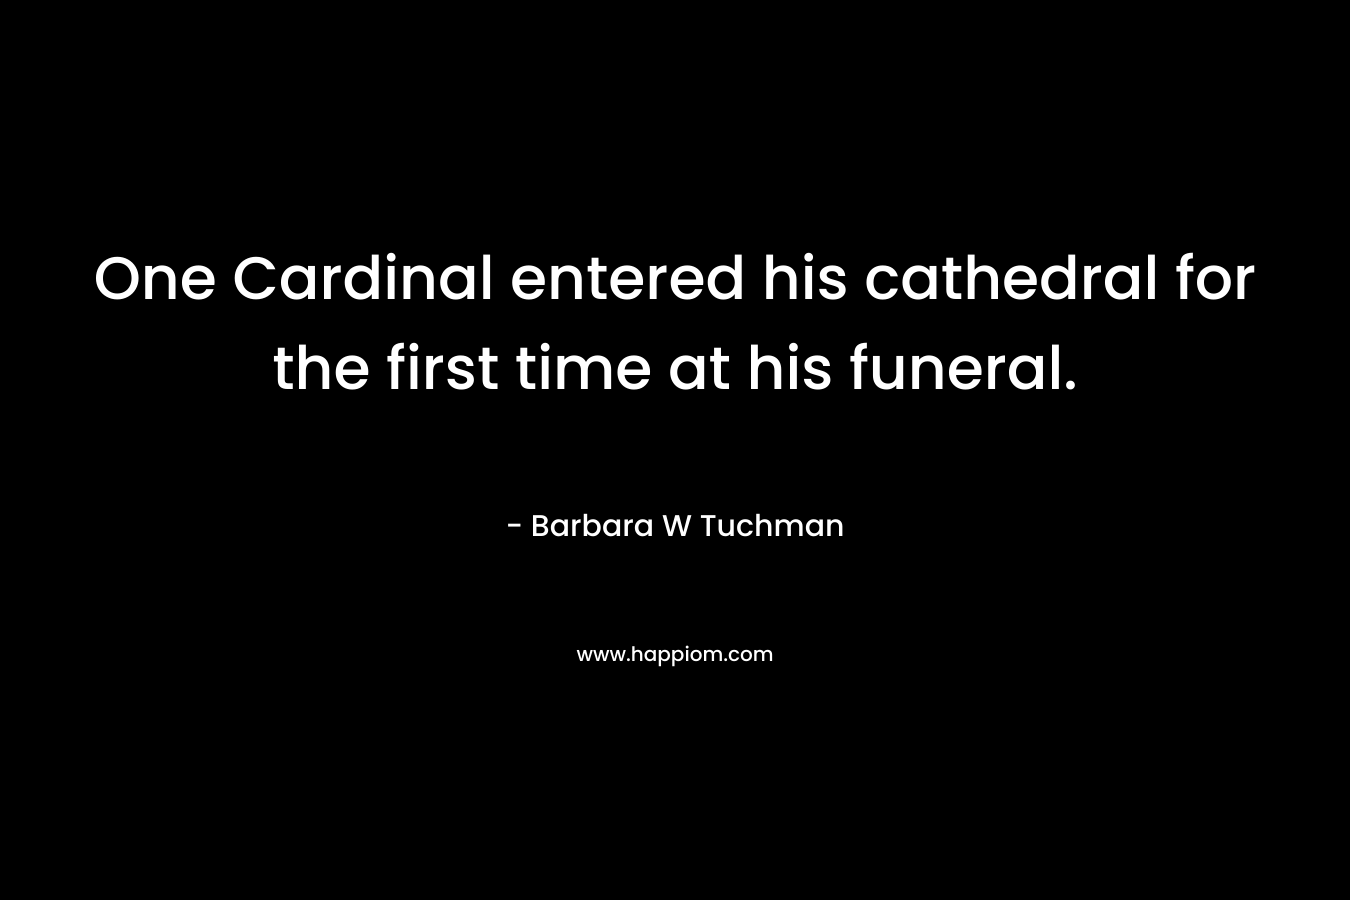 One Cardinal entered his cathedral for the first time at his funeral. – Barbara W Tuchman